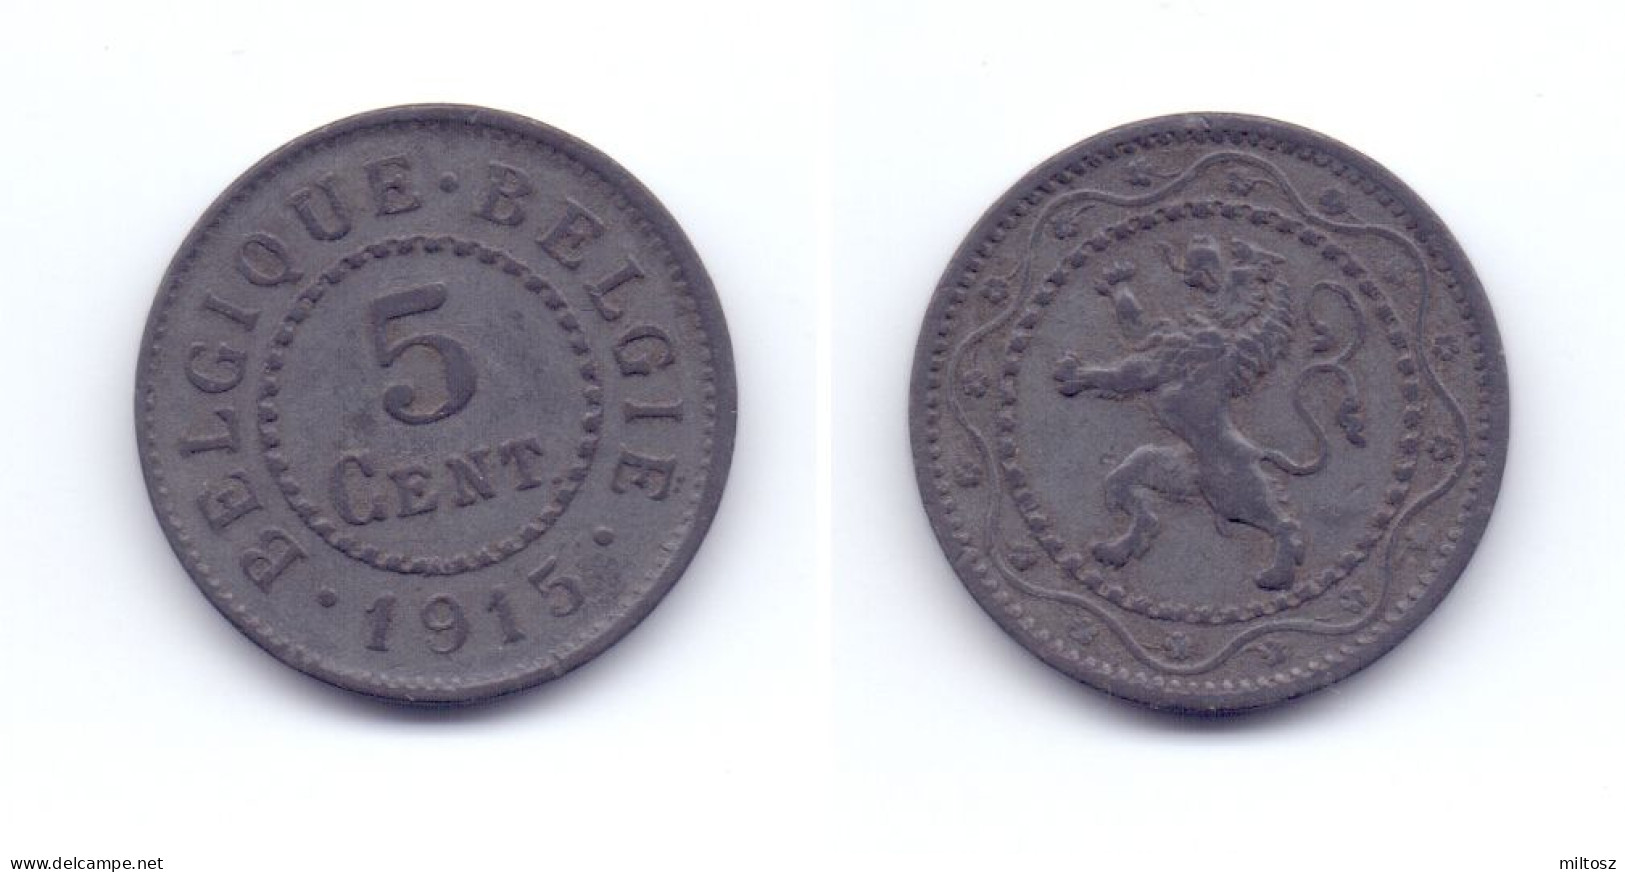 Belgium 5 Centimes 1915 WWi Issue - 5 Cents